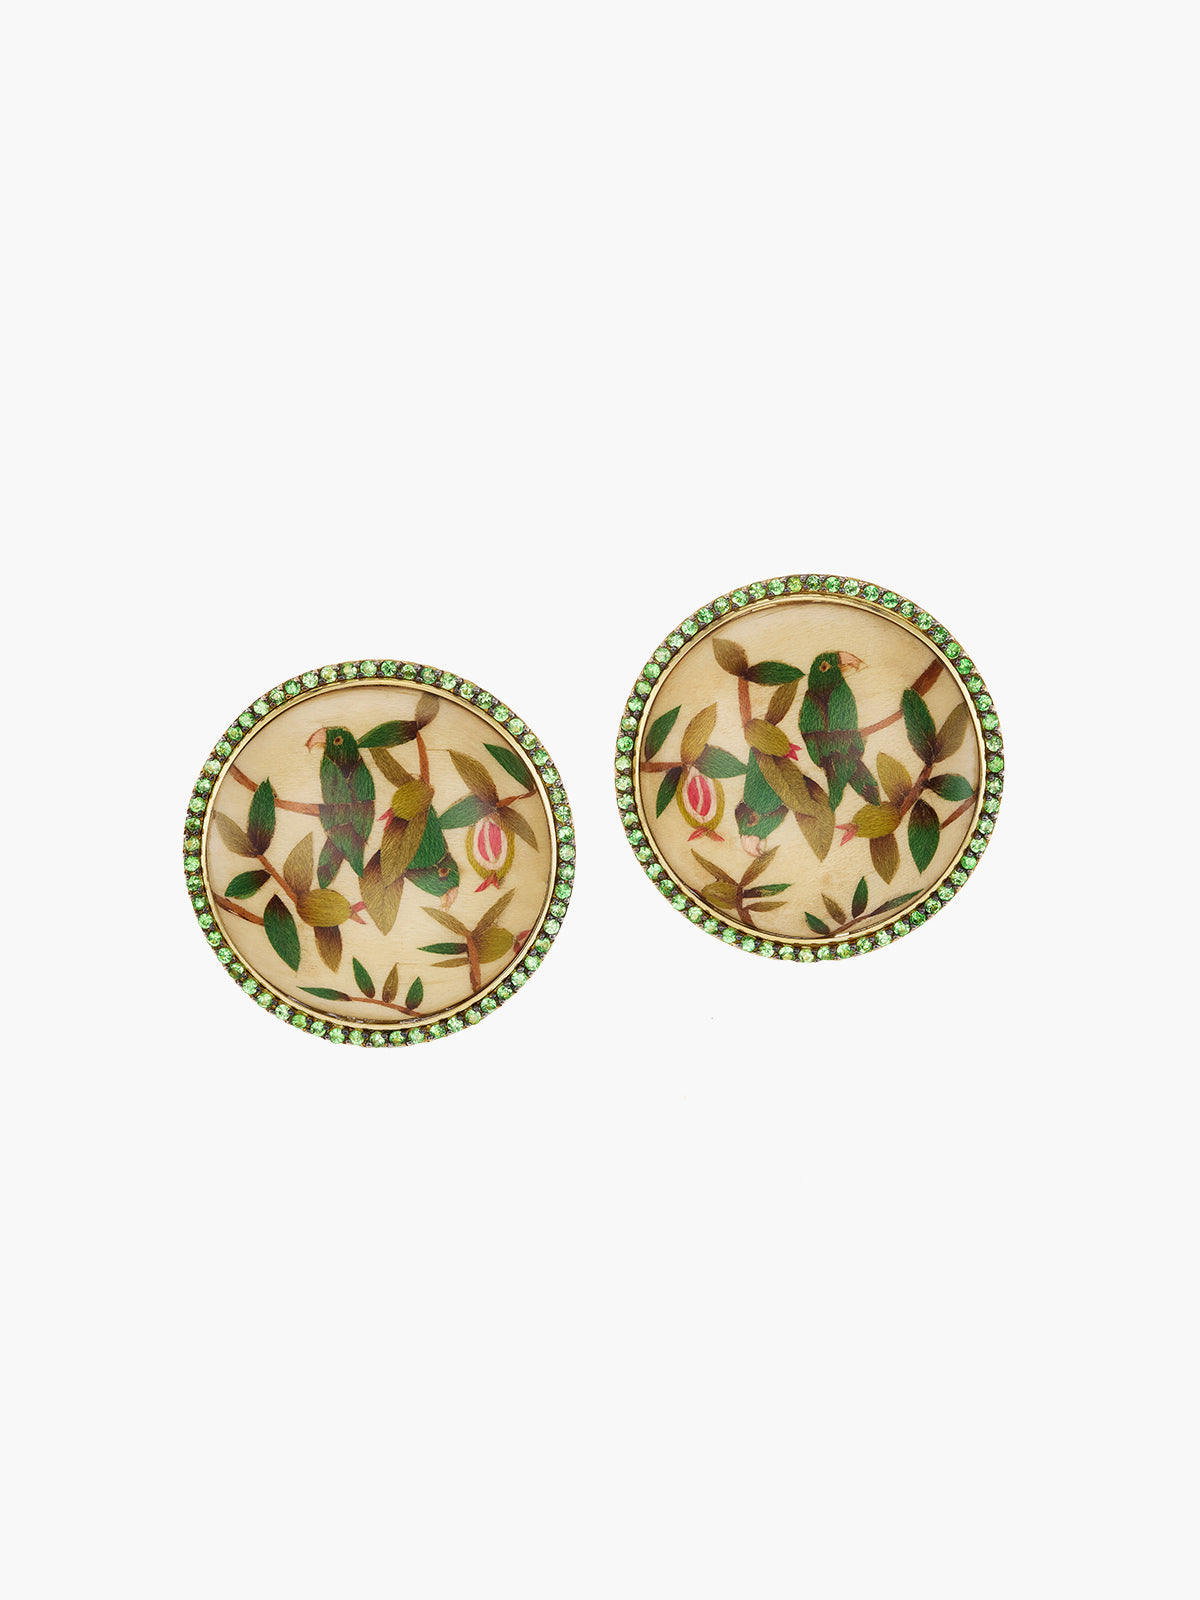 Round Marquetry Earrings with Tsavorite | Guava and Parrot on Cream Round Marquetry Earrings with Tsavorite | Guava and Parrot on Cream